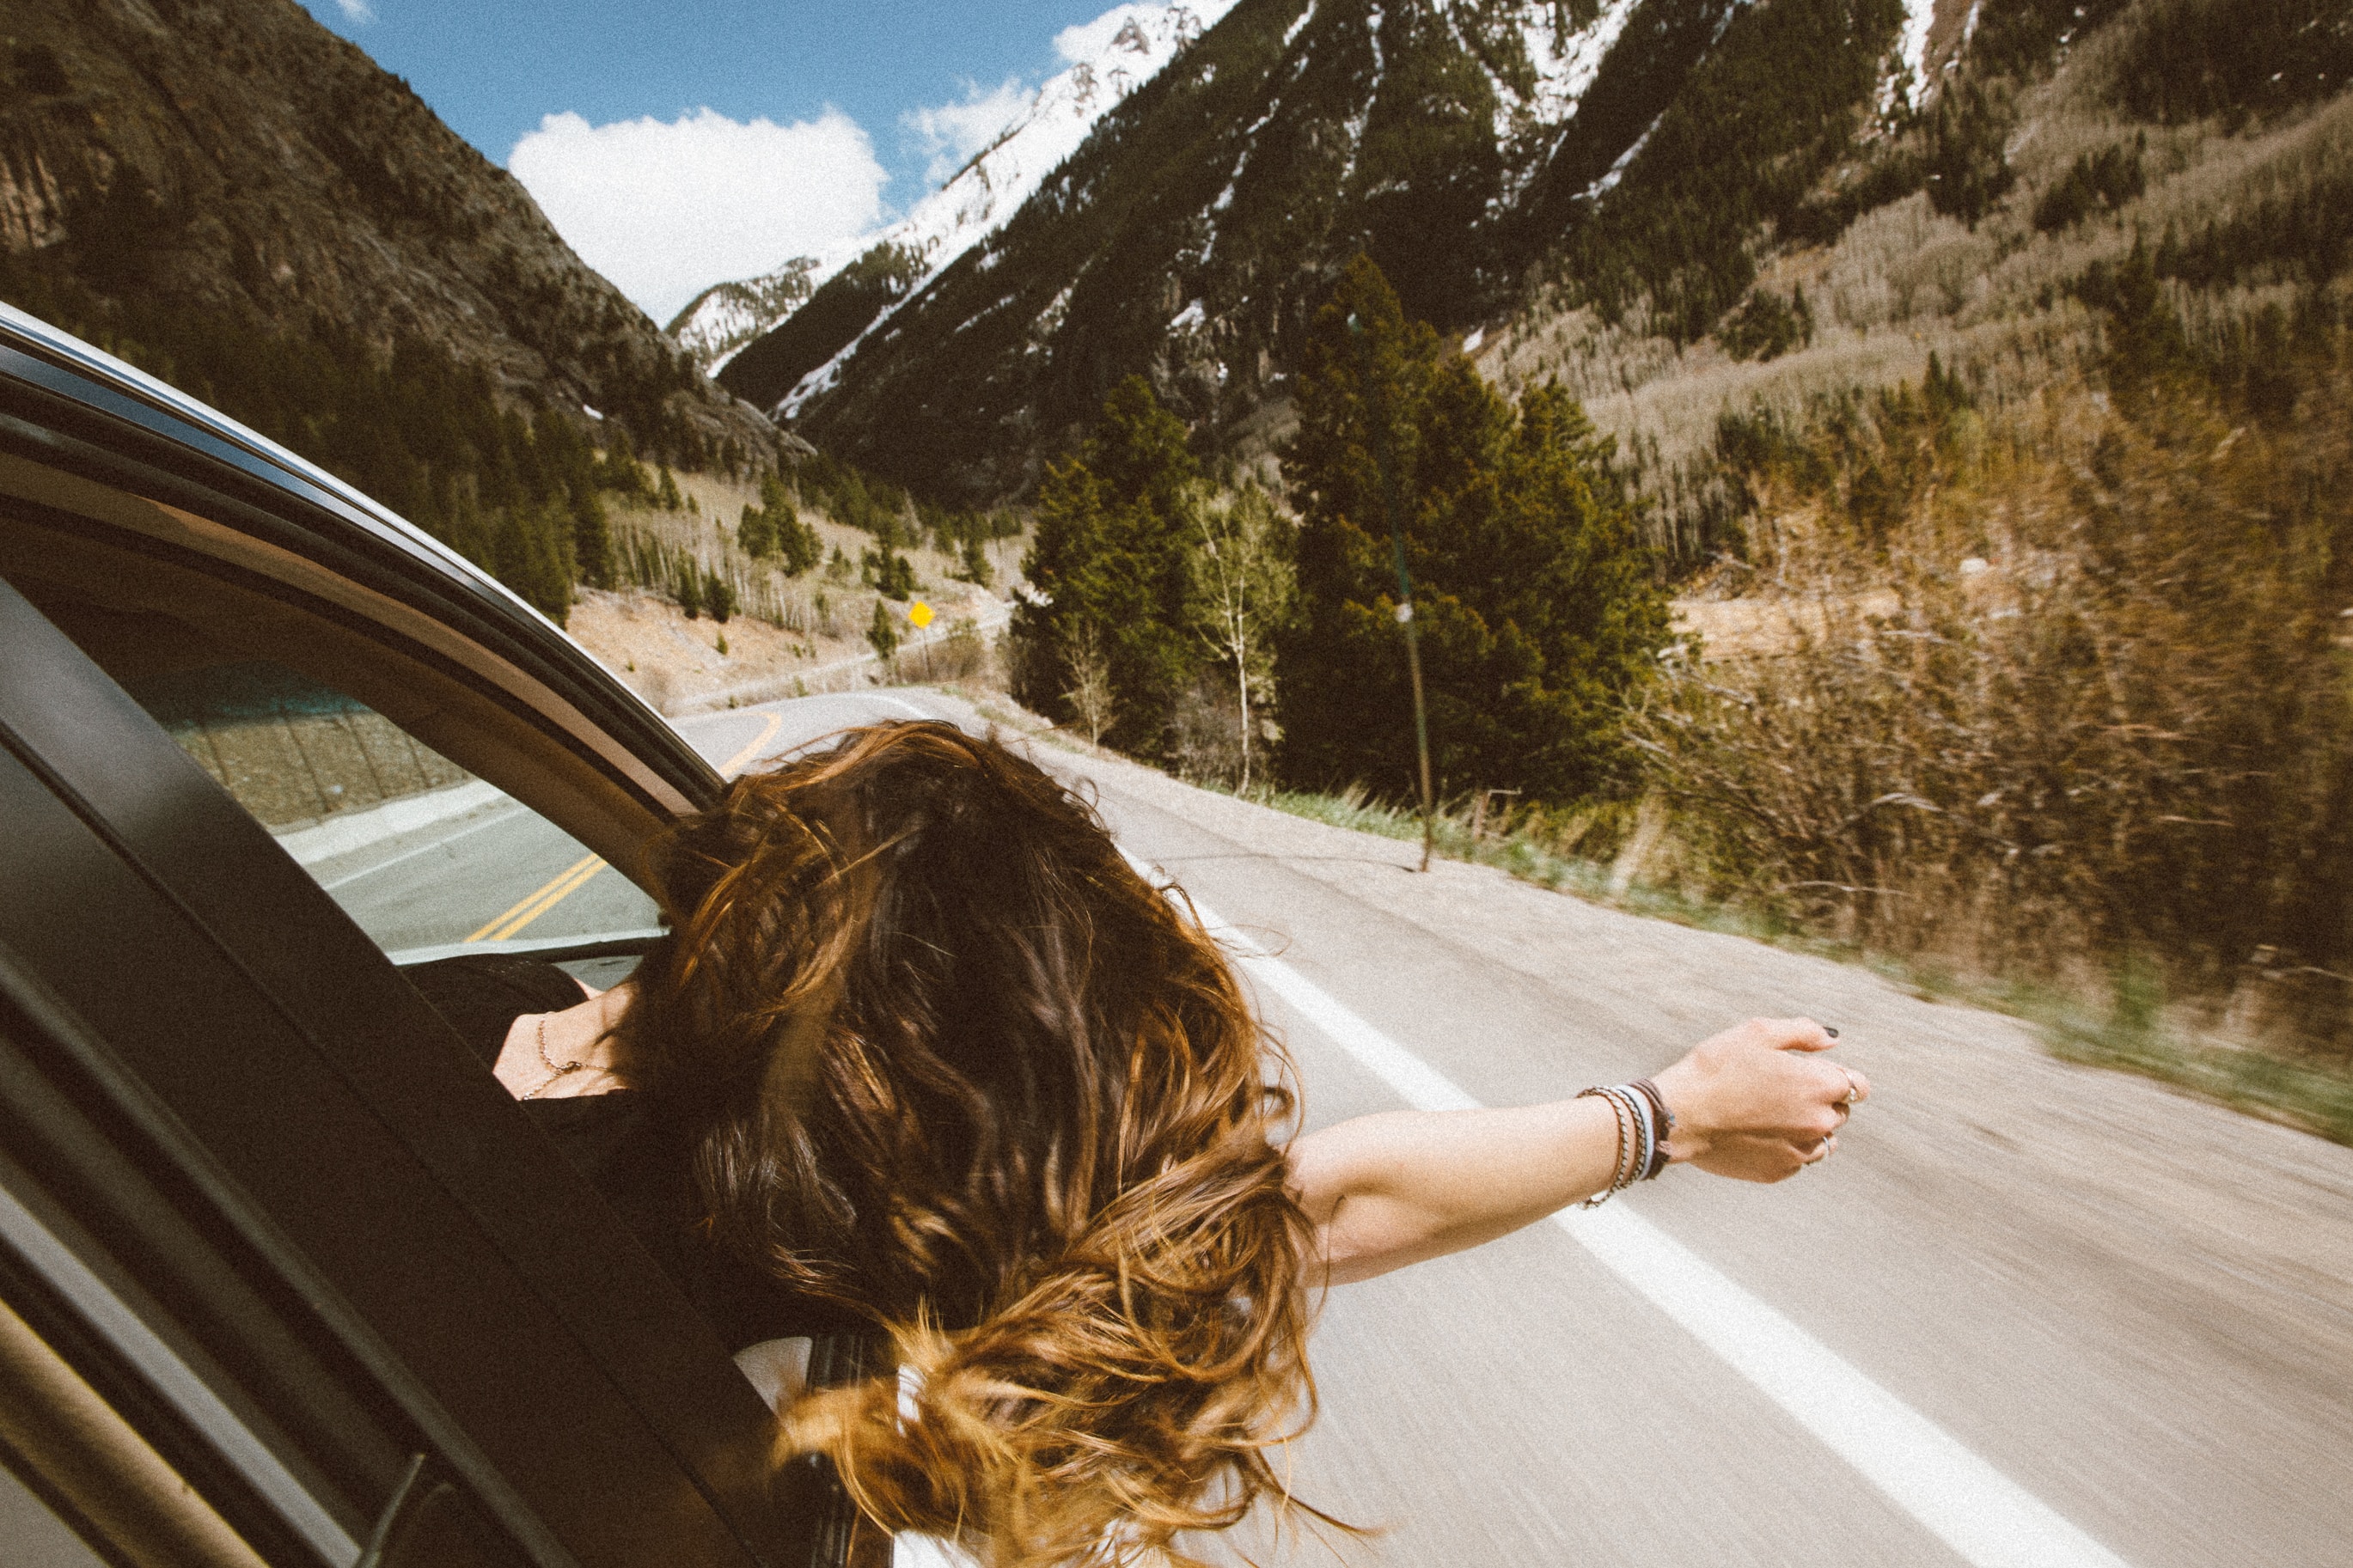 Woman enjoying the breeze out the window of her car on a road trip.